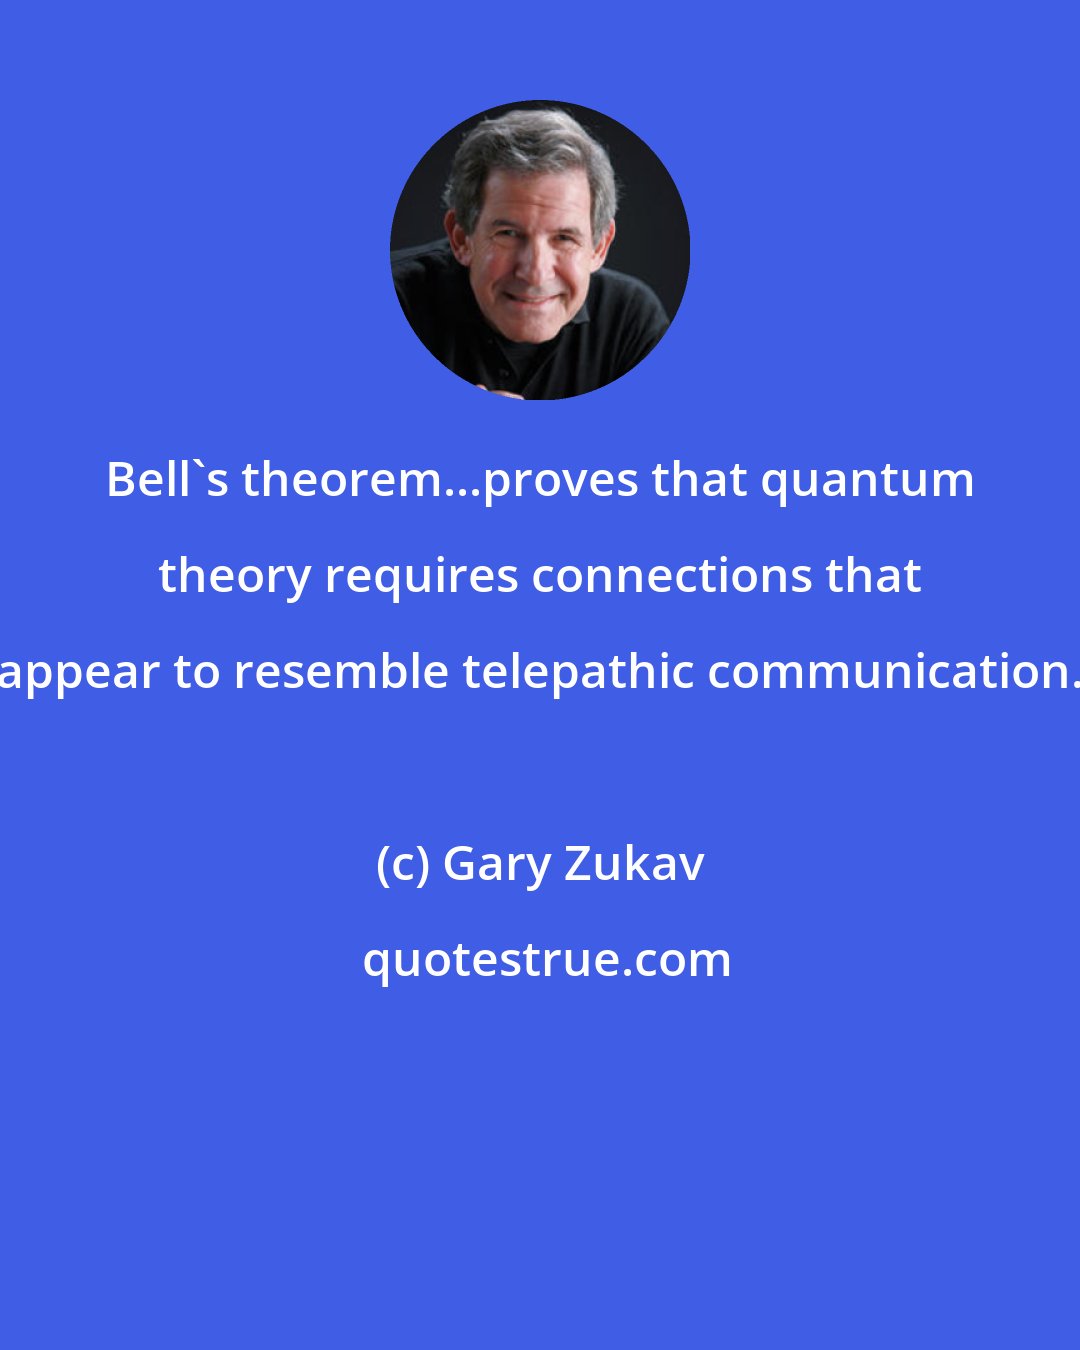 Gary Zukav: Bell's theorem...proves that quantum theory requires connections that appear to resemble telepathic communication.